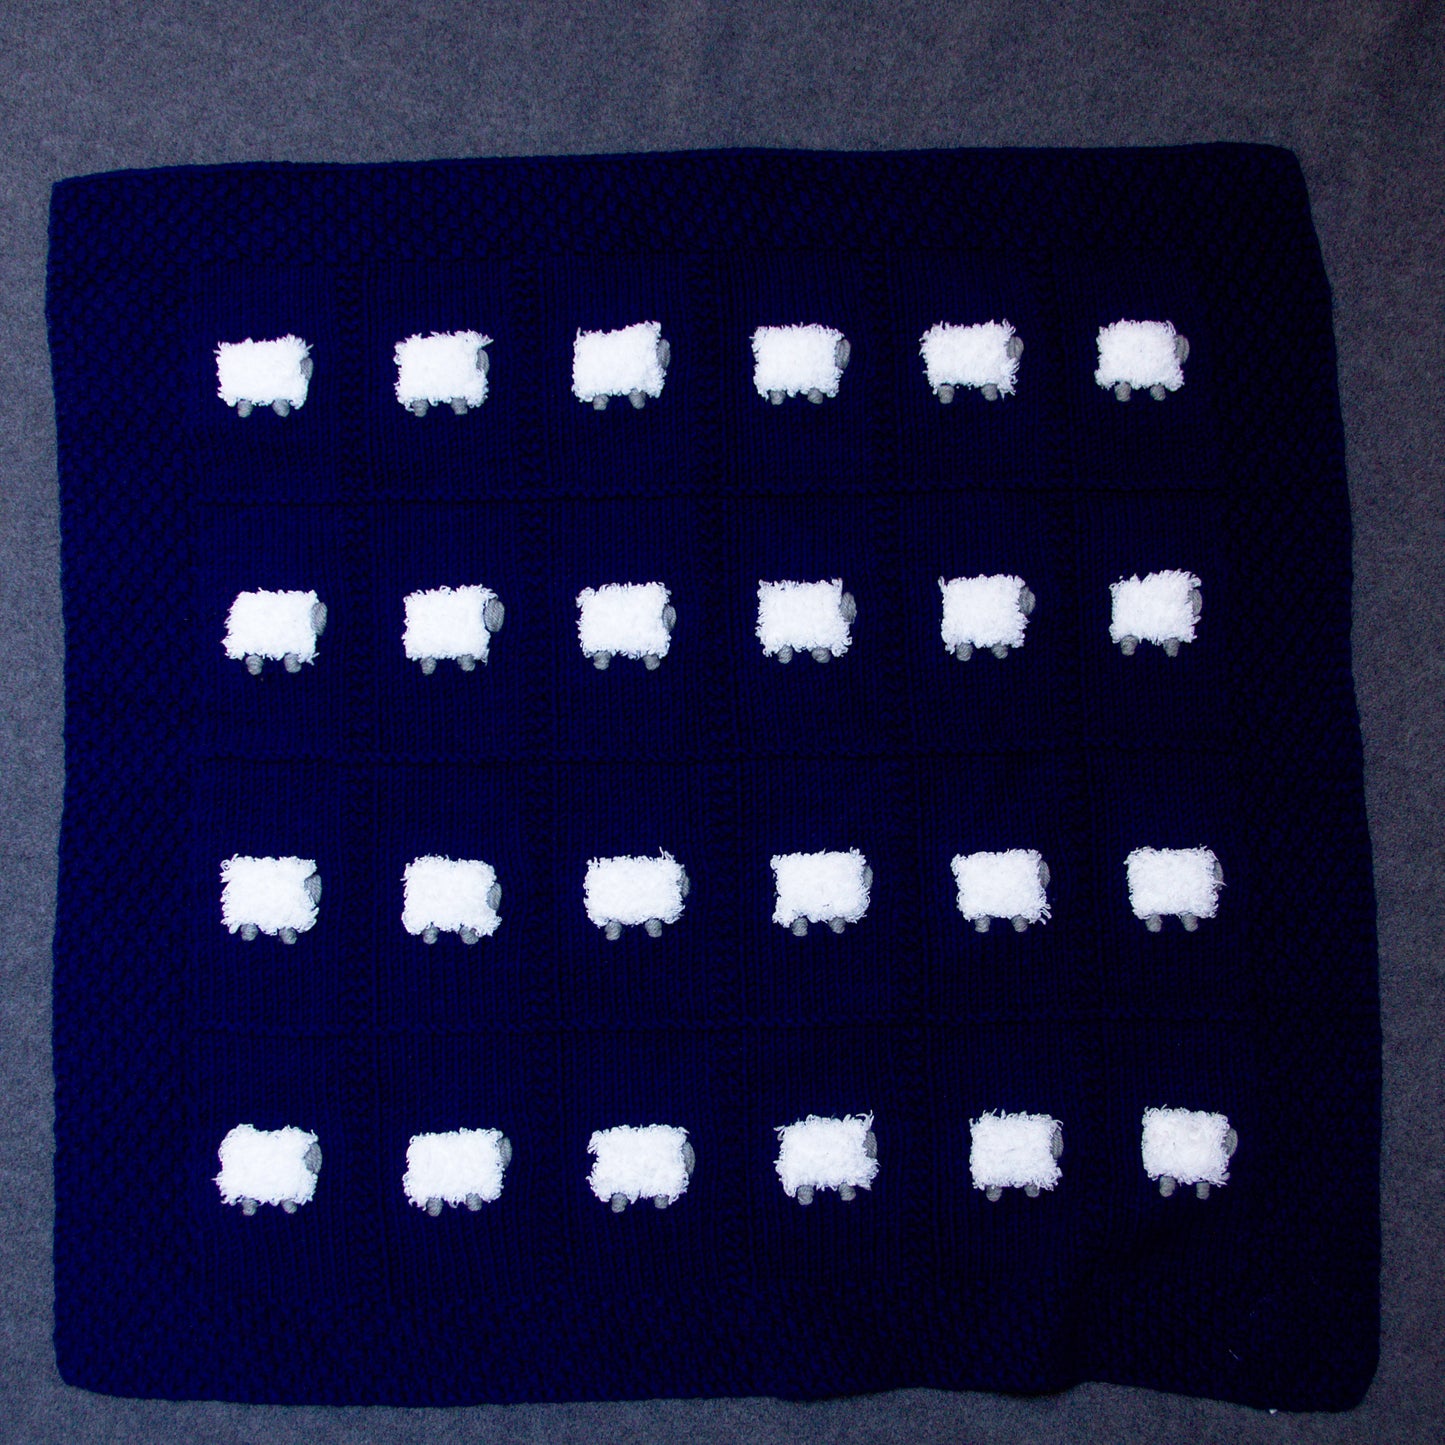 Mostly cotton navy baby blanket, hand-knitted